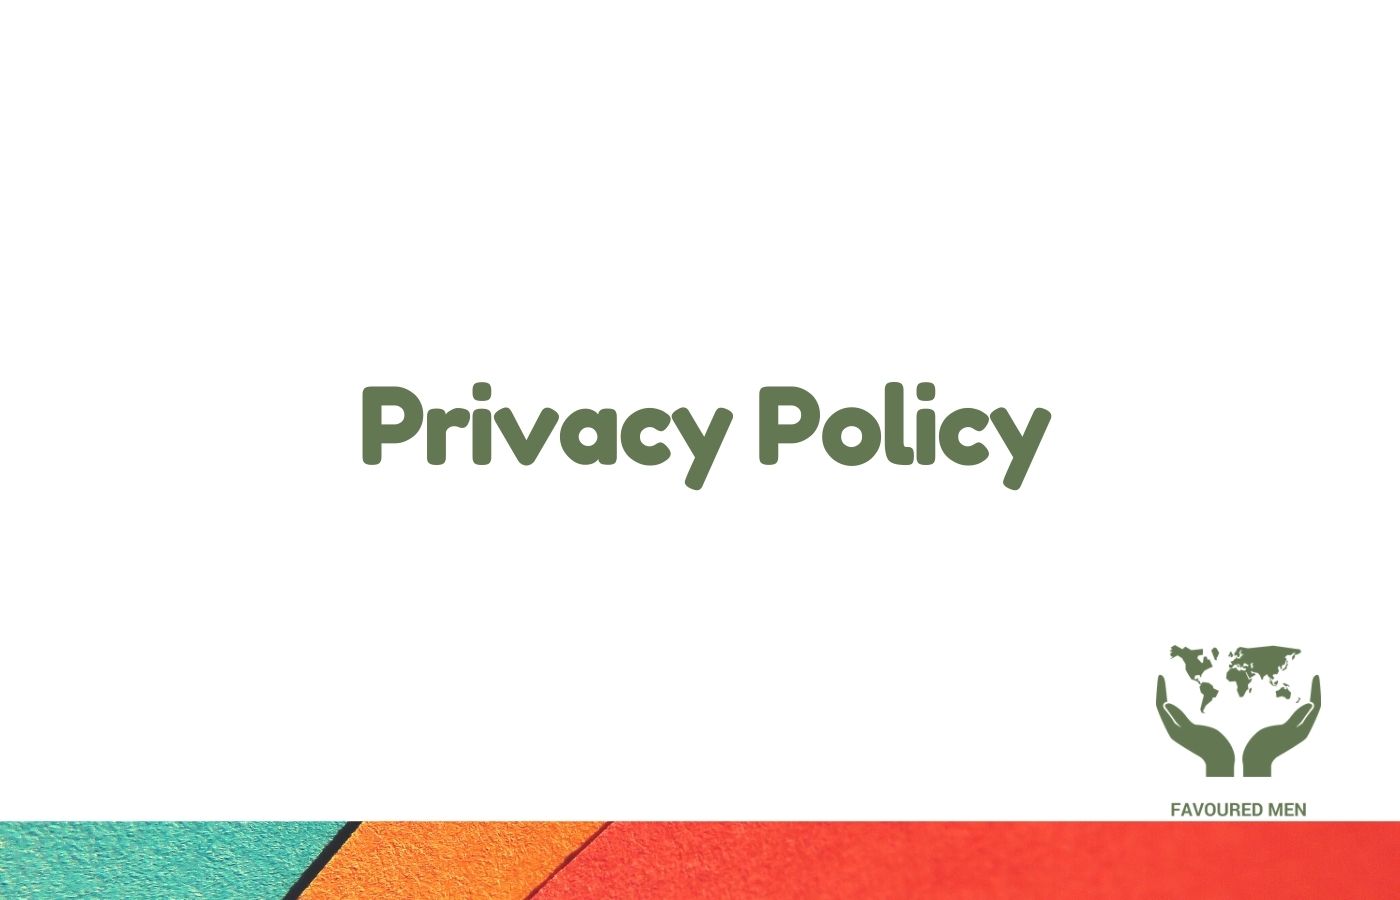 PRIVACY POLICY _ Favoured Men ngo website, NGO Afrika (Favoured Men) , NGO Osterreich (Favoured Men) , Add Favoured Men NGO to your NGO liste _FavouredMen.org